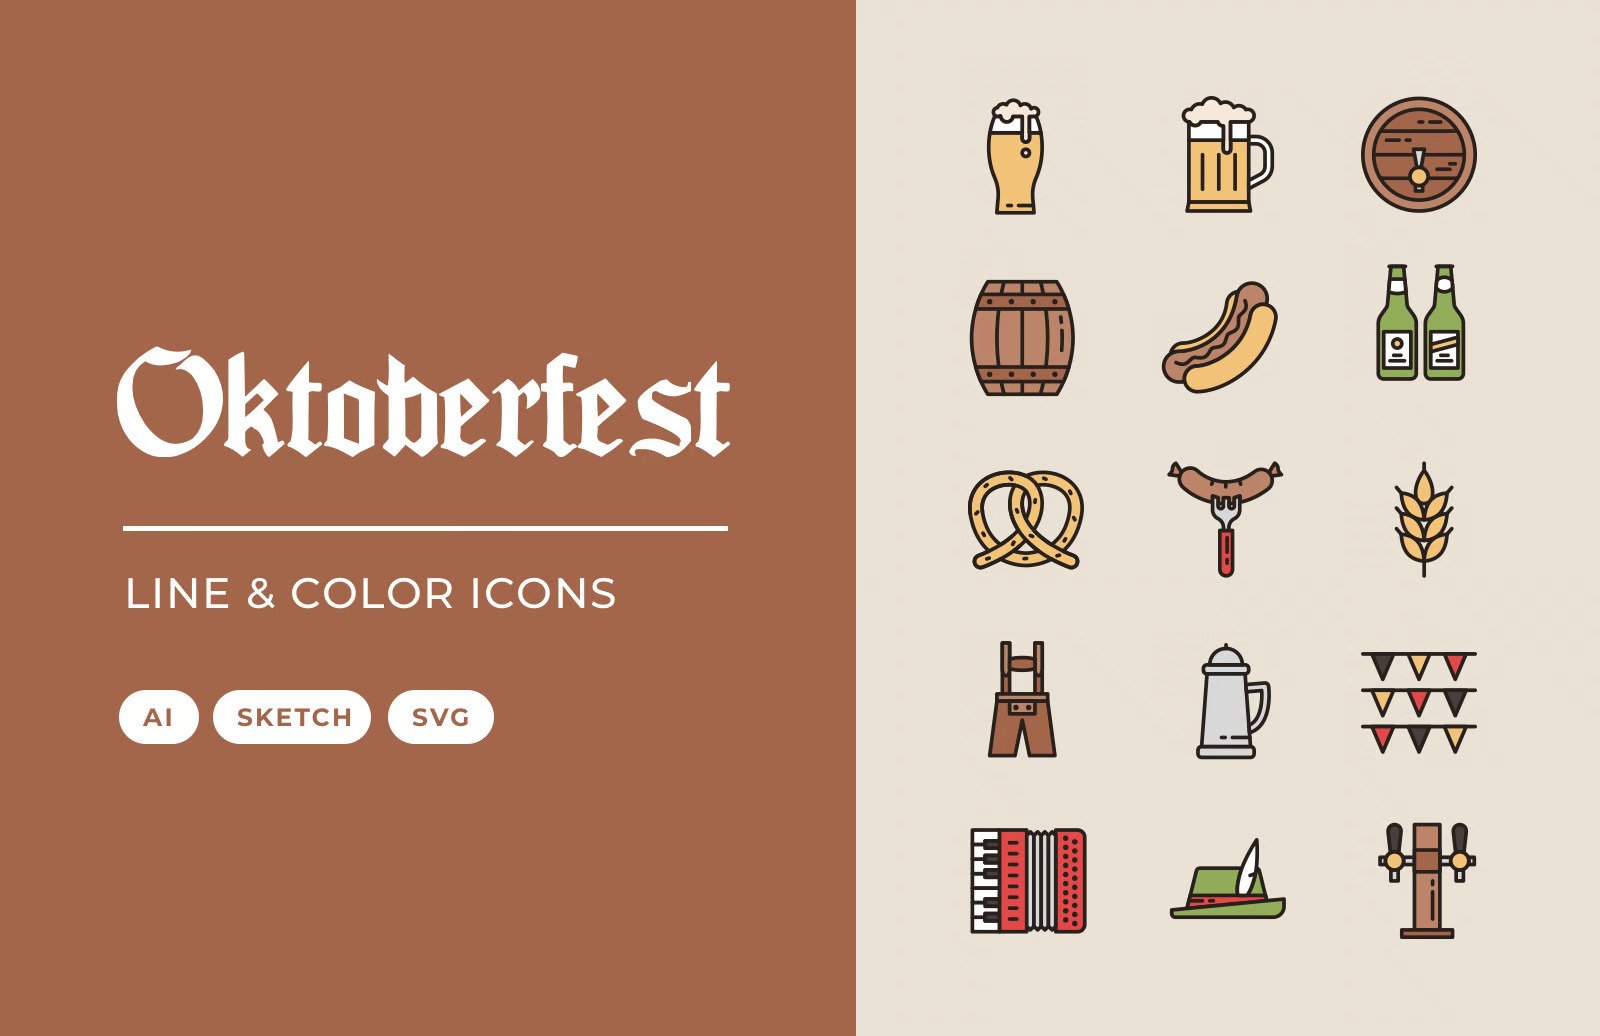 A line and color free oktoberfest icons